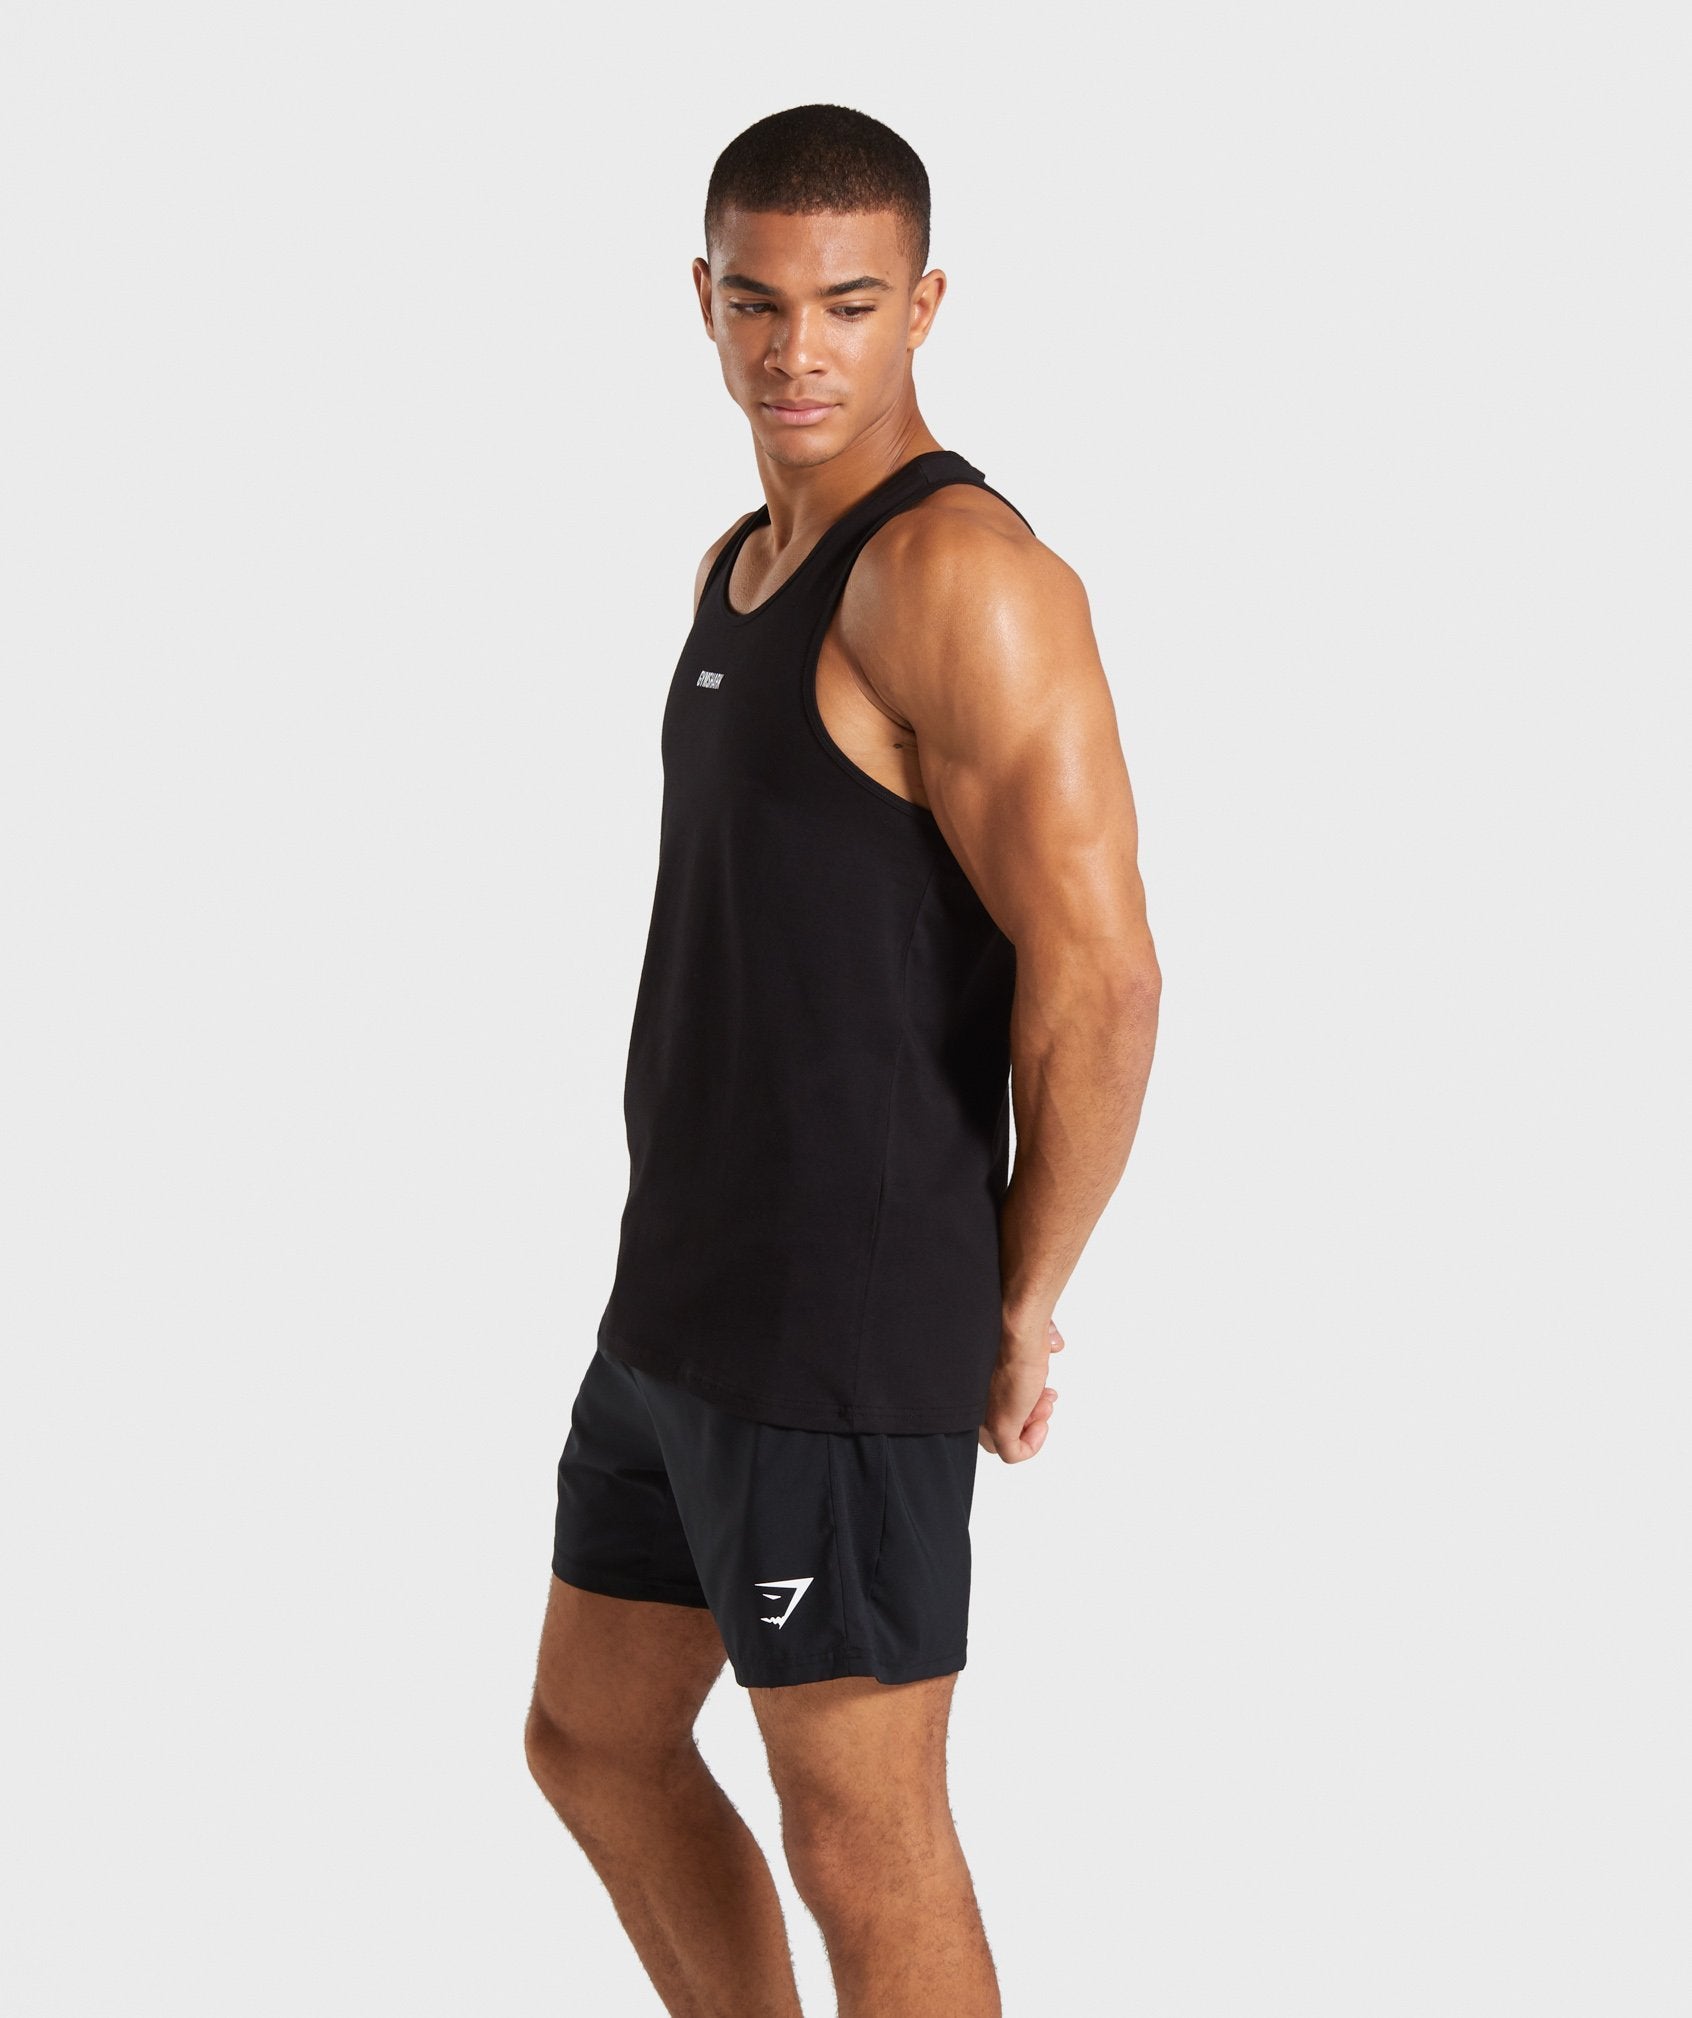 TPT Classic Tank in Black - view 3